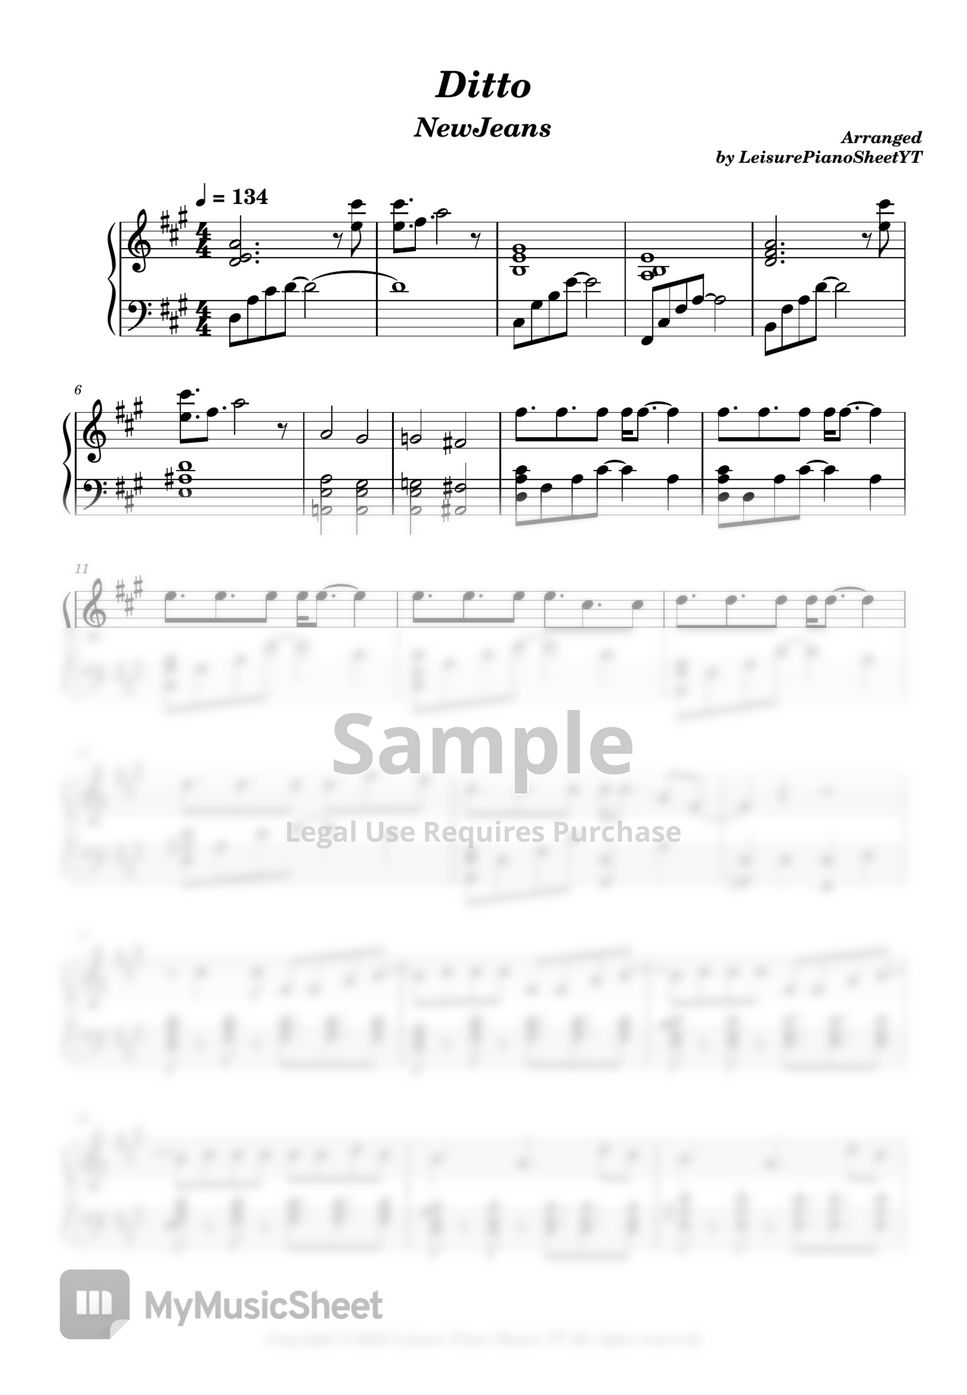 NewJeans - Ditto Sheet by Leisure Piano Sheets YT